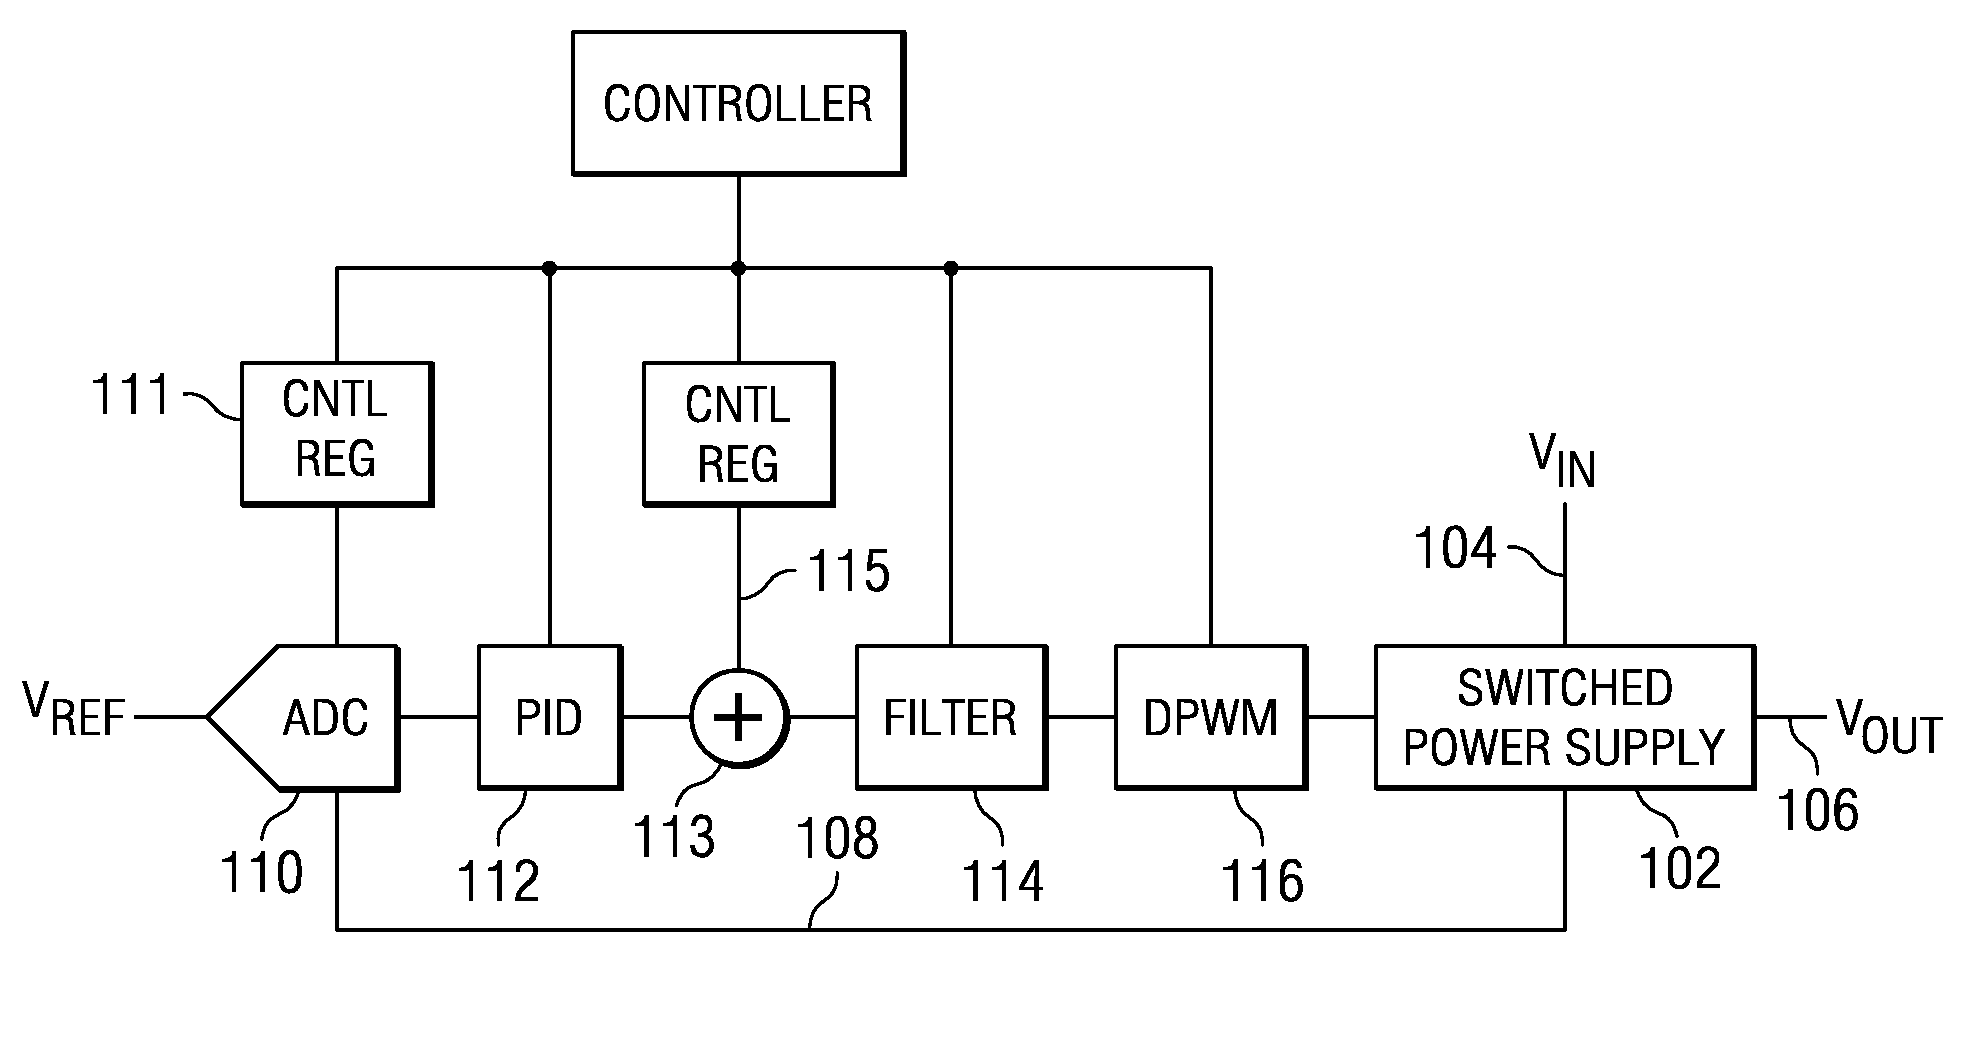 Digital PWM controller for preventing limit cycle oscillations